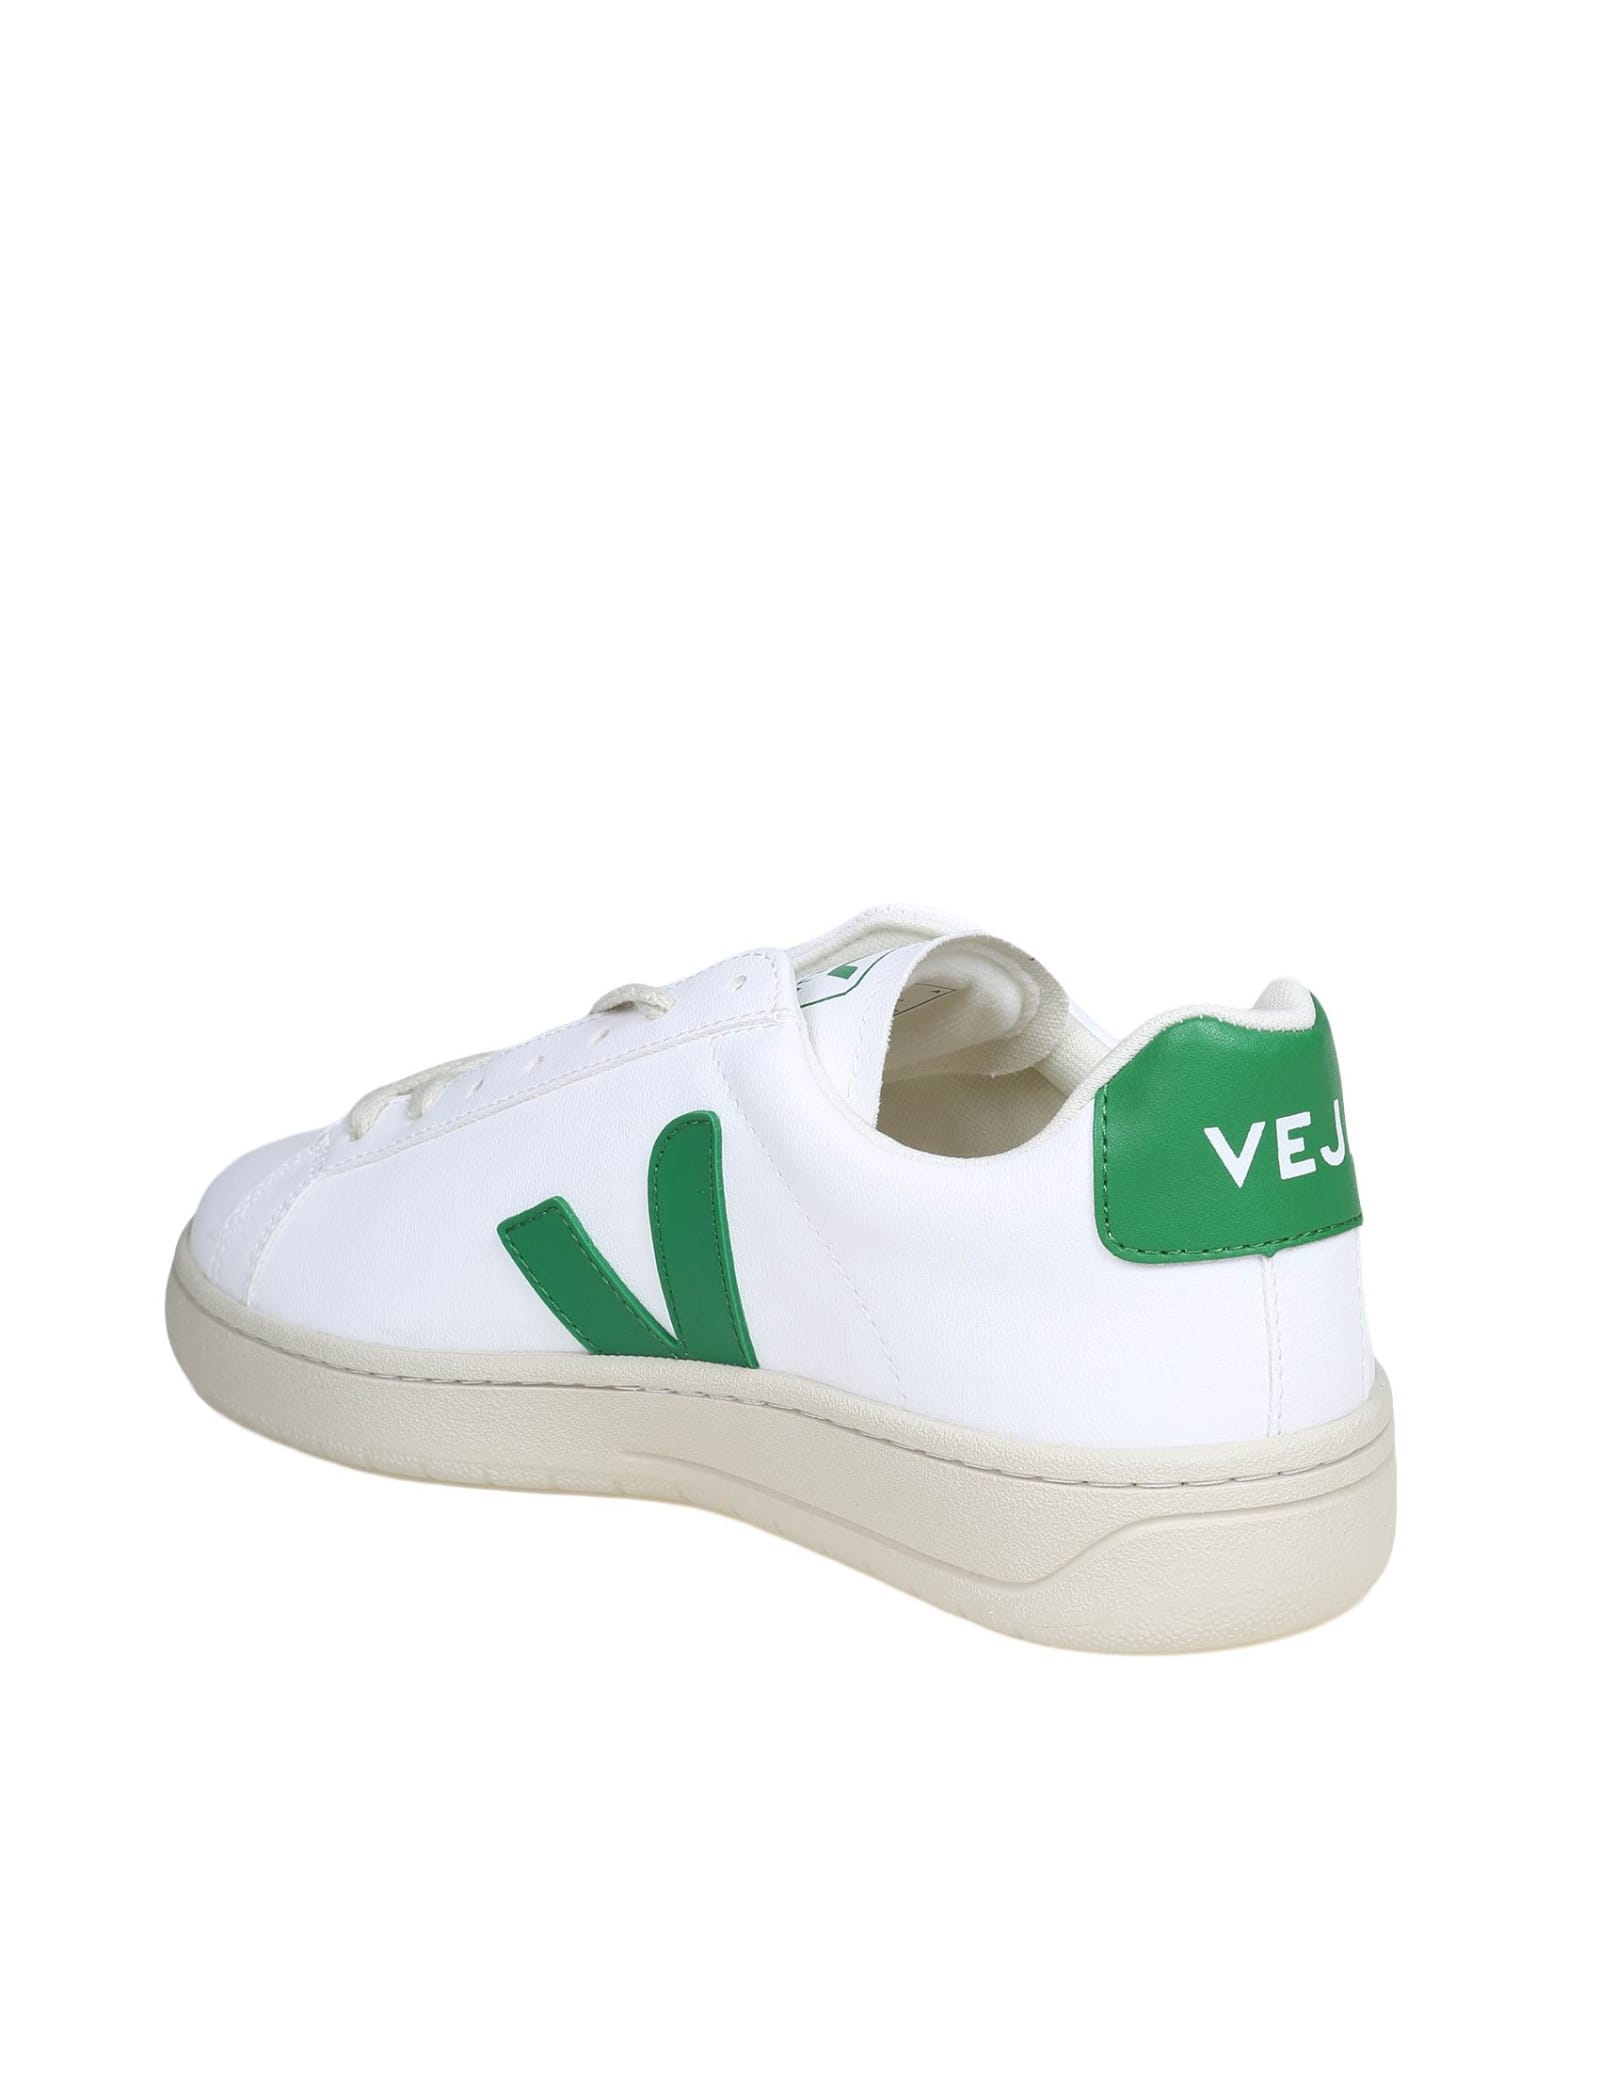 Shop Veja Urca Sneakers In White And Green Leather